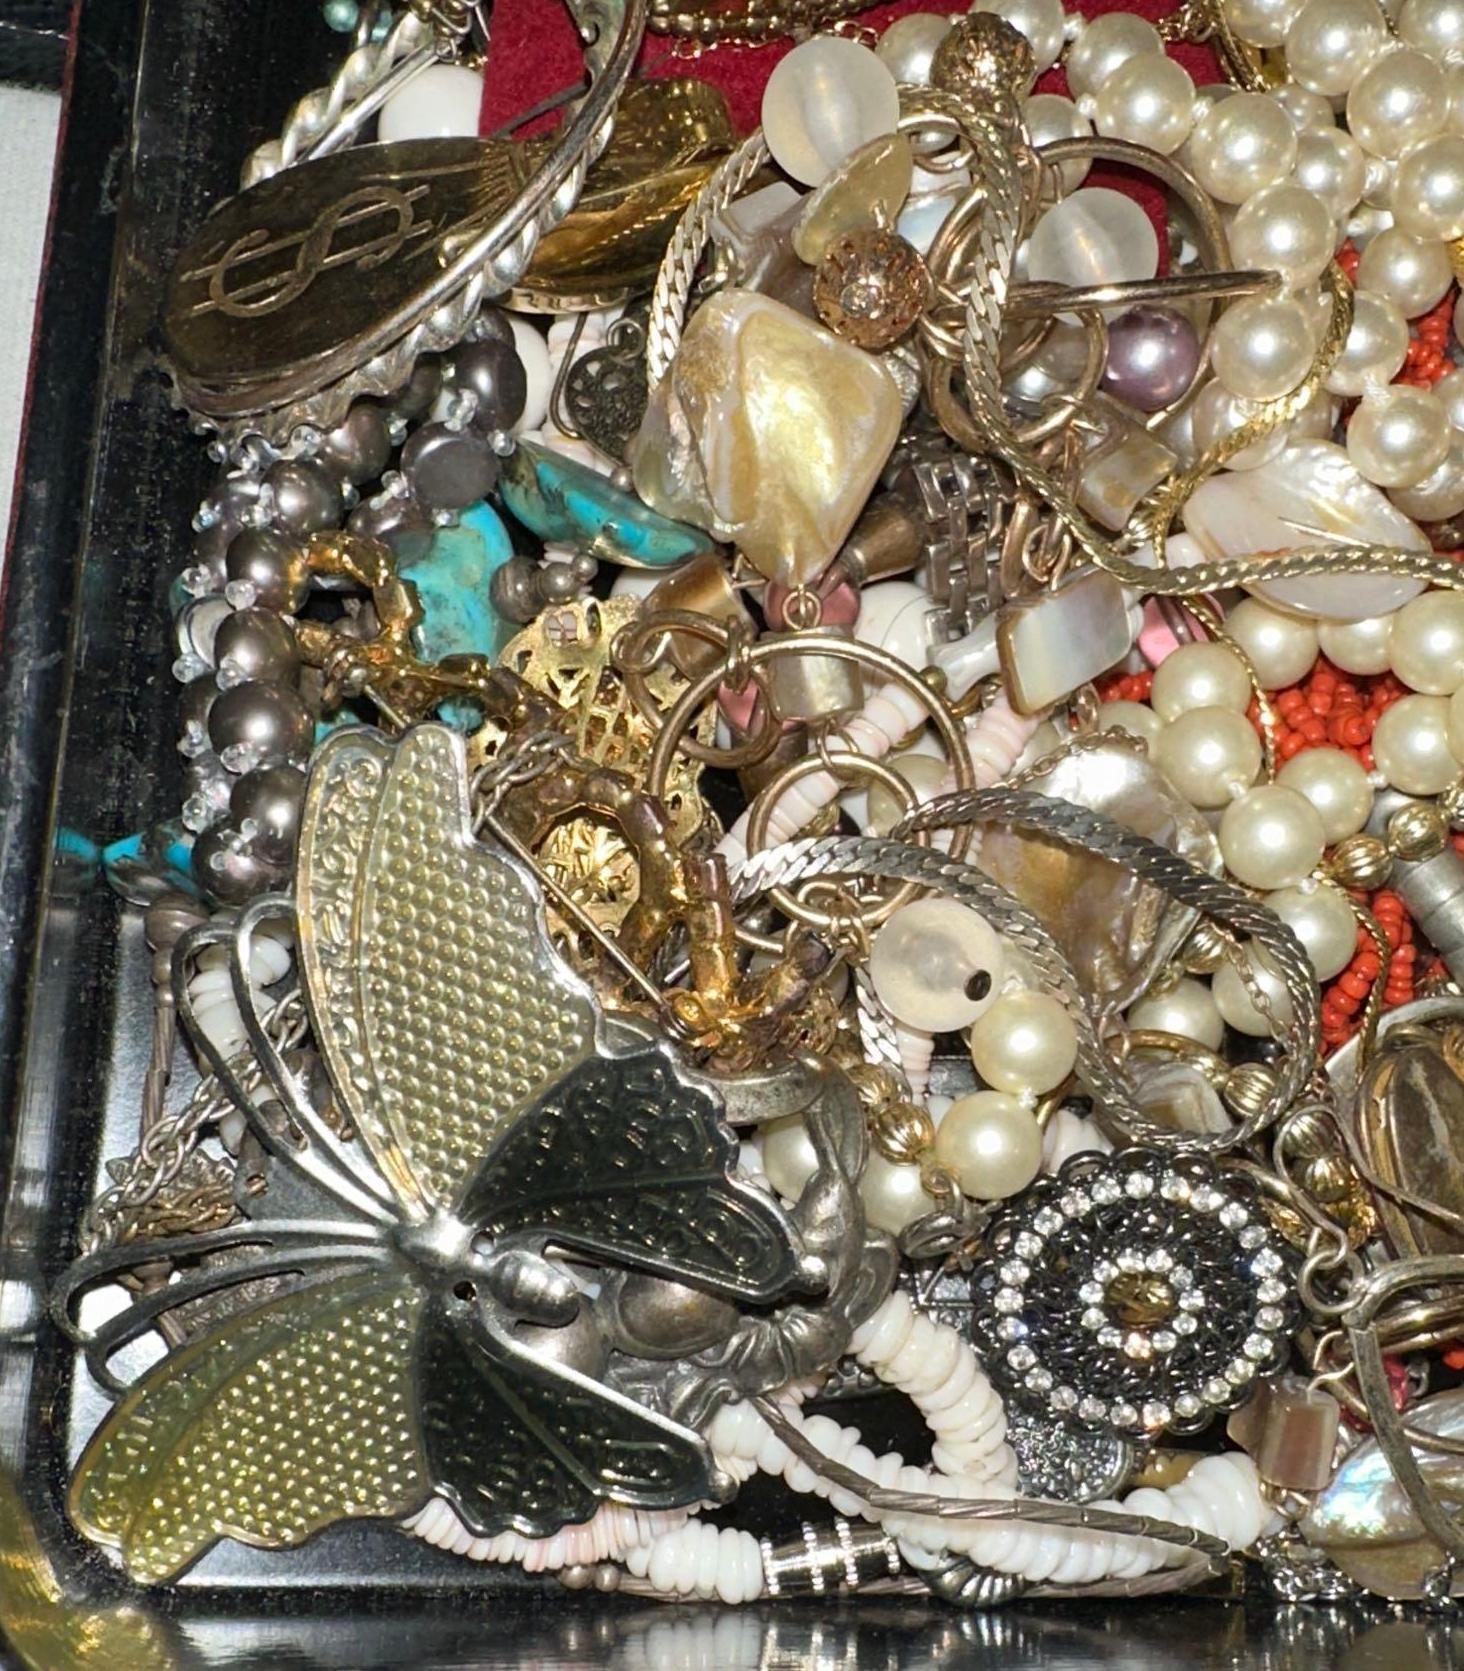 Lot of Unsearched Jewelry from Abandoned Storage unit